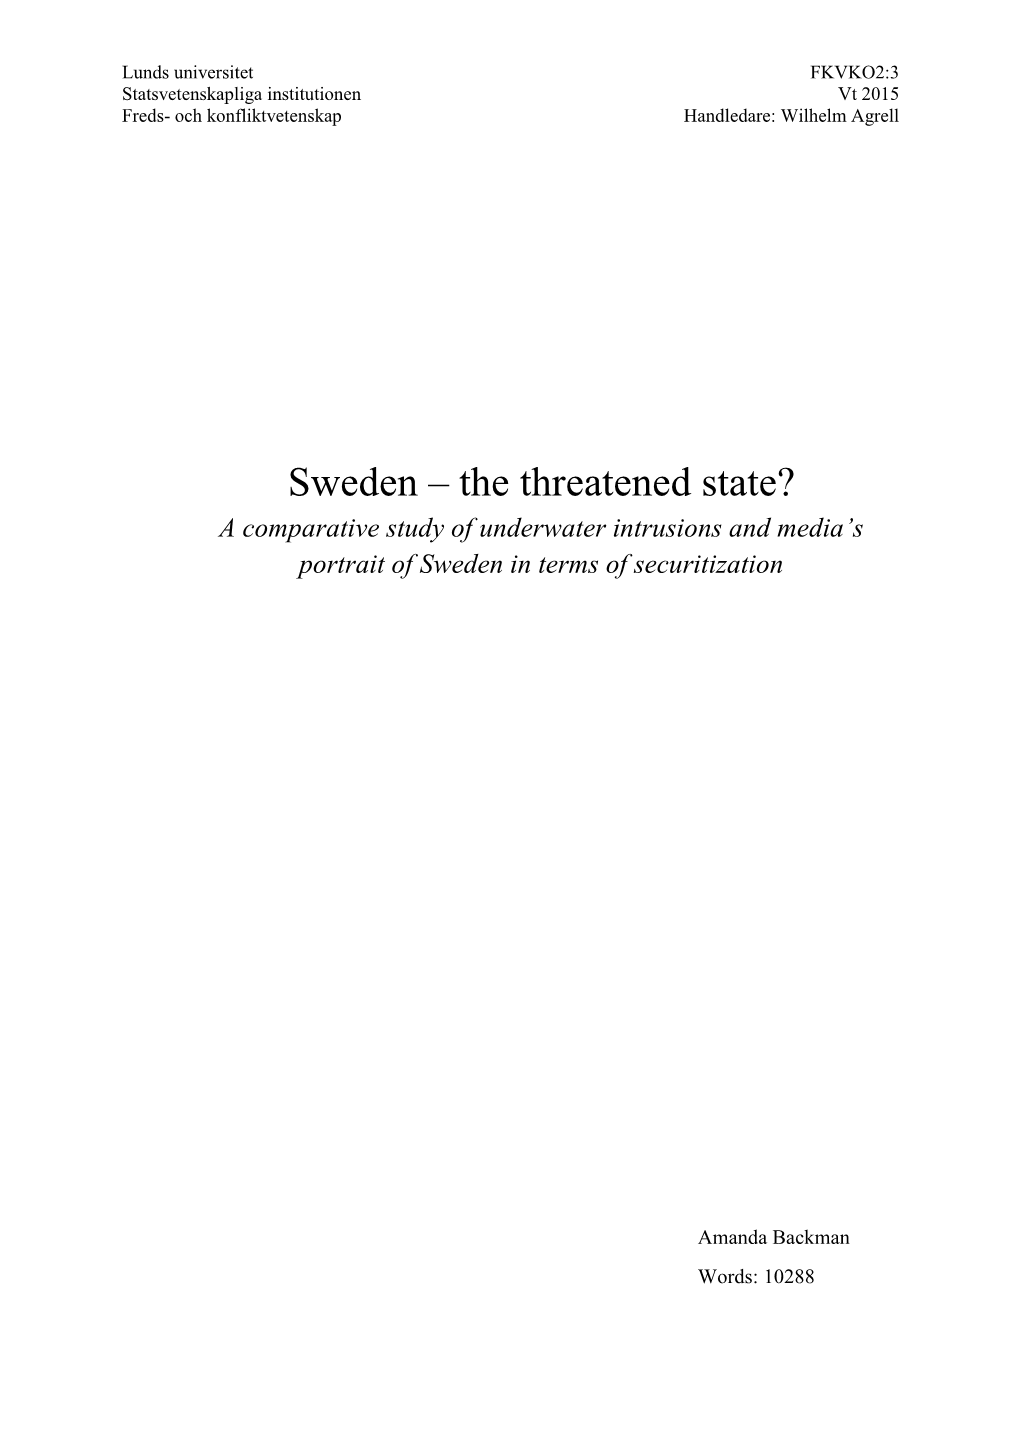 Sweden – the Threatened State? a Comparative Study of Underwater Intrusions and Media’S Portrait of Sweden in Terms of Securitization